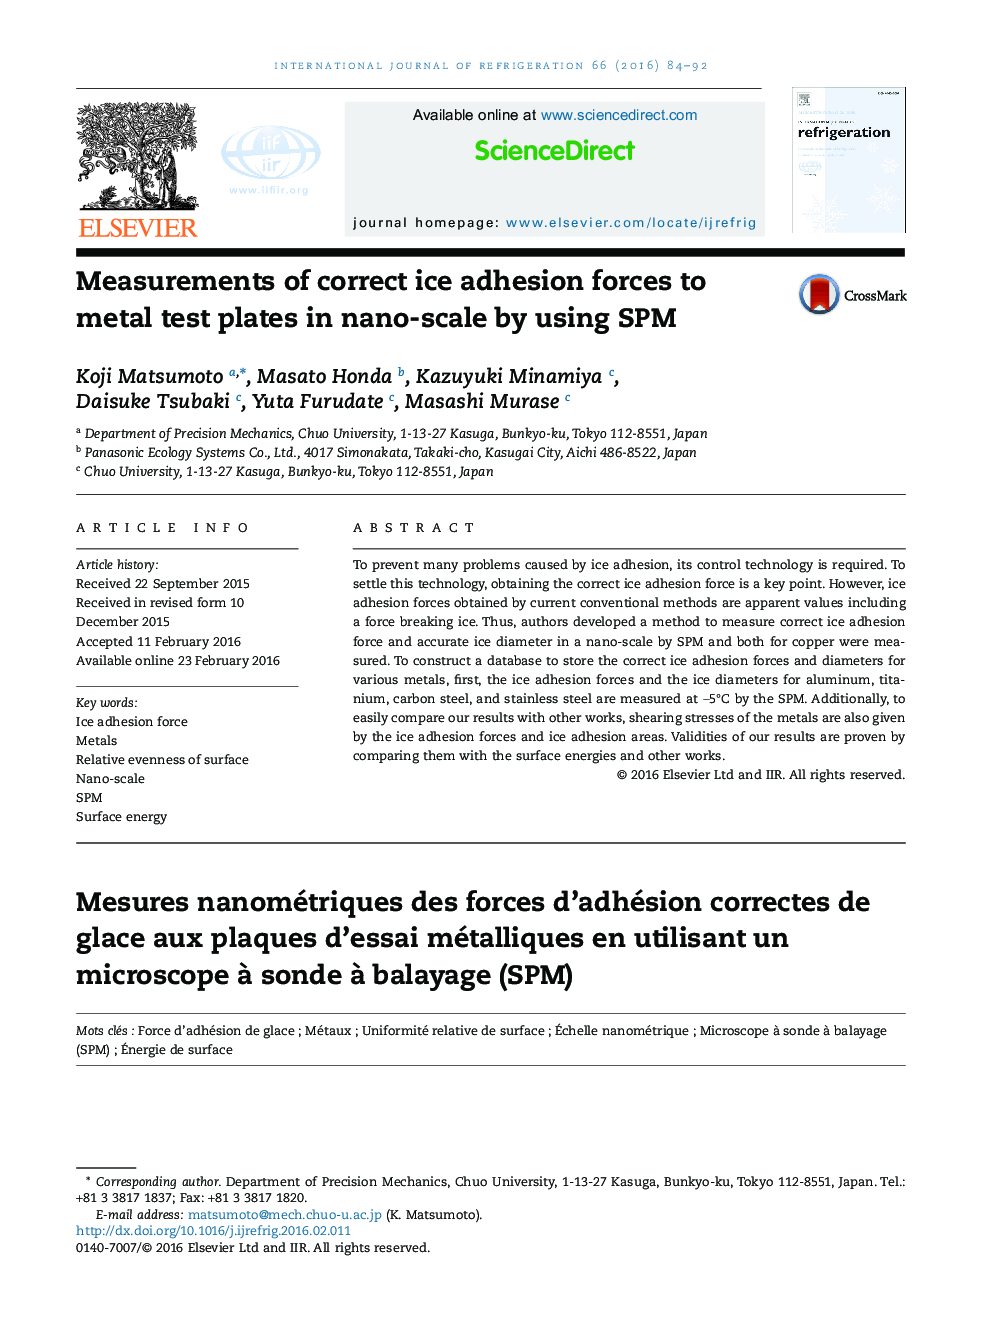 Measurements of correct ice adhesion forces to metal test plates in nano-scale by using SPM